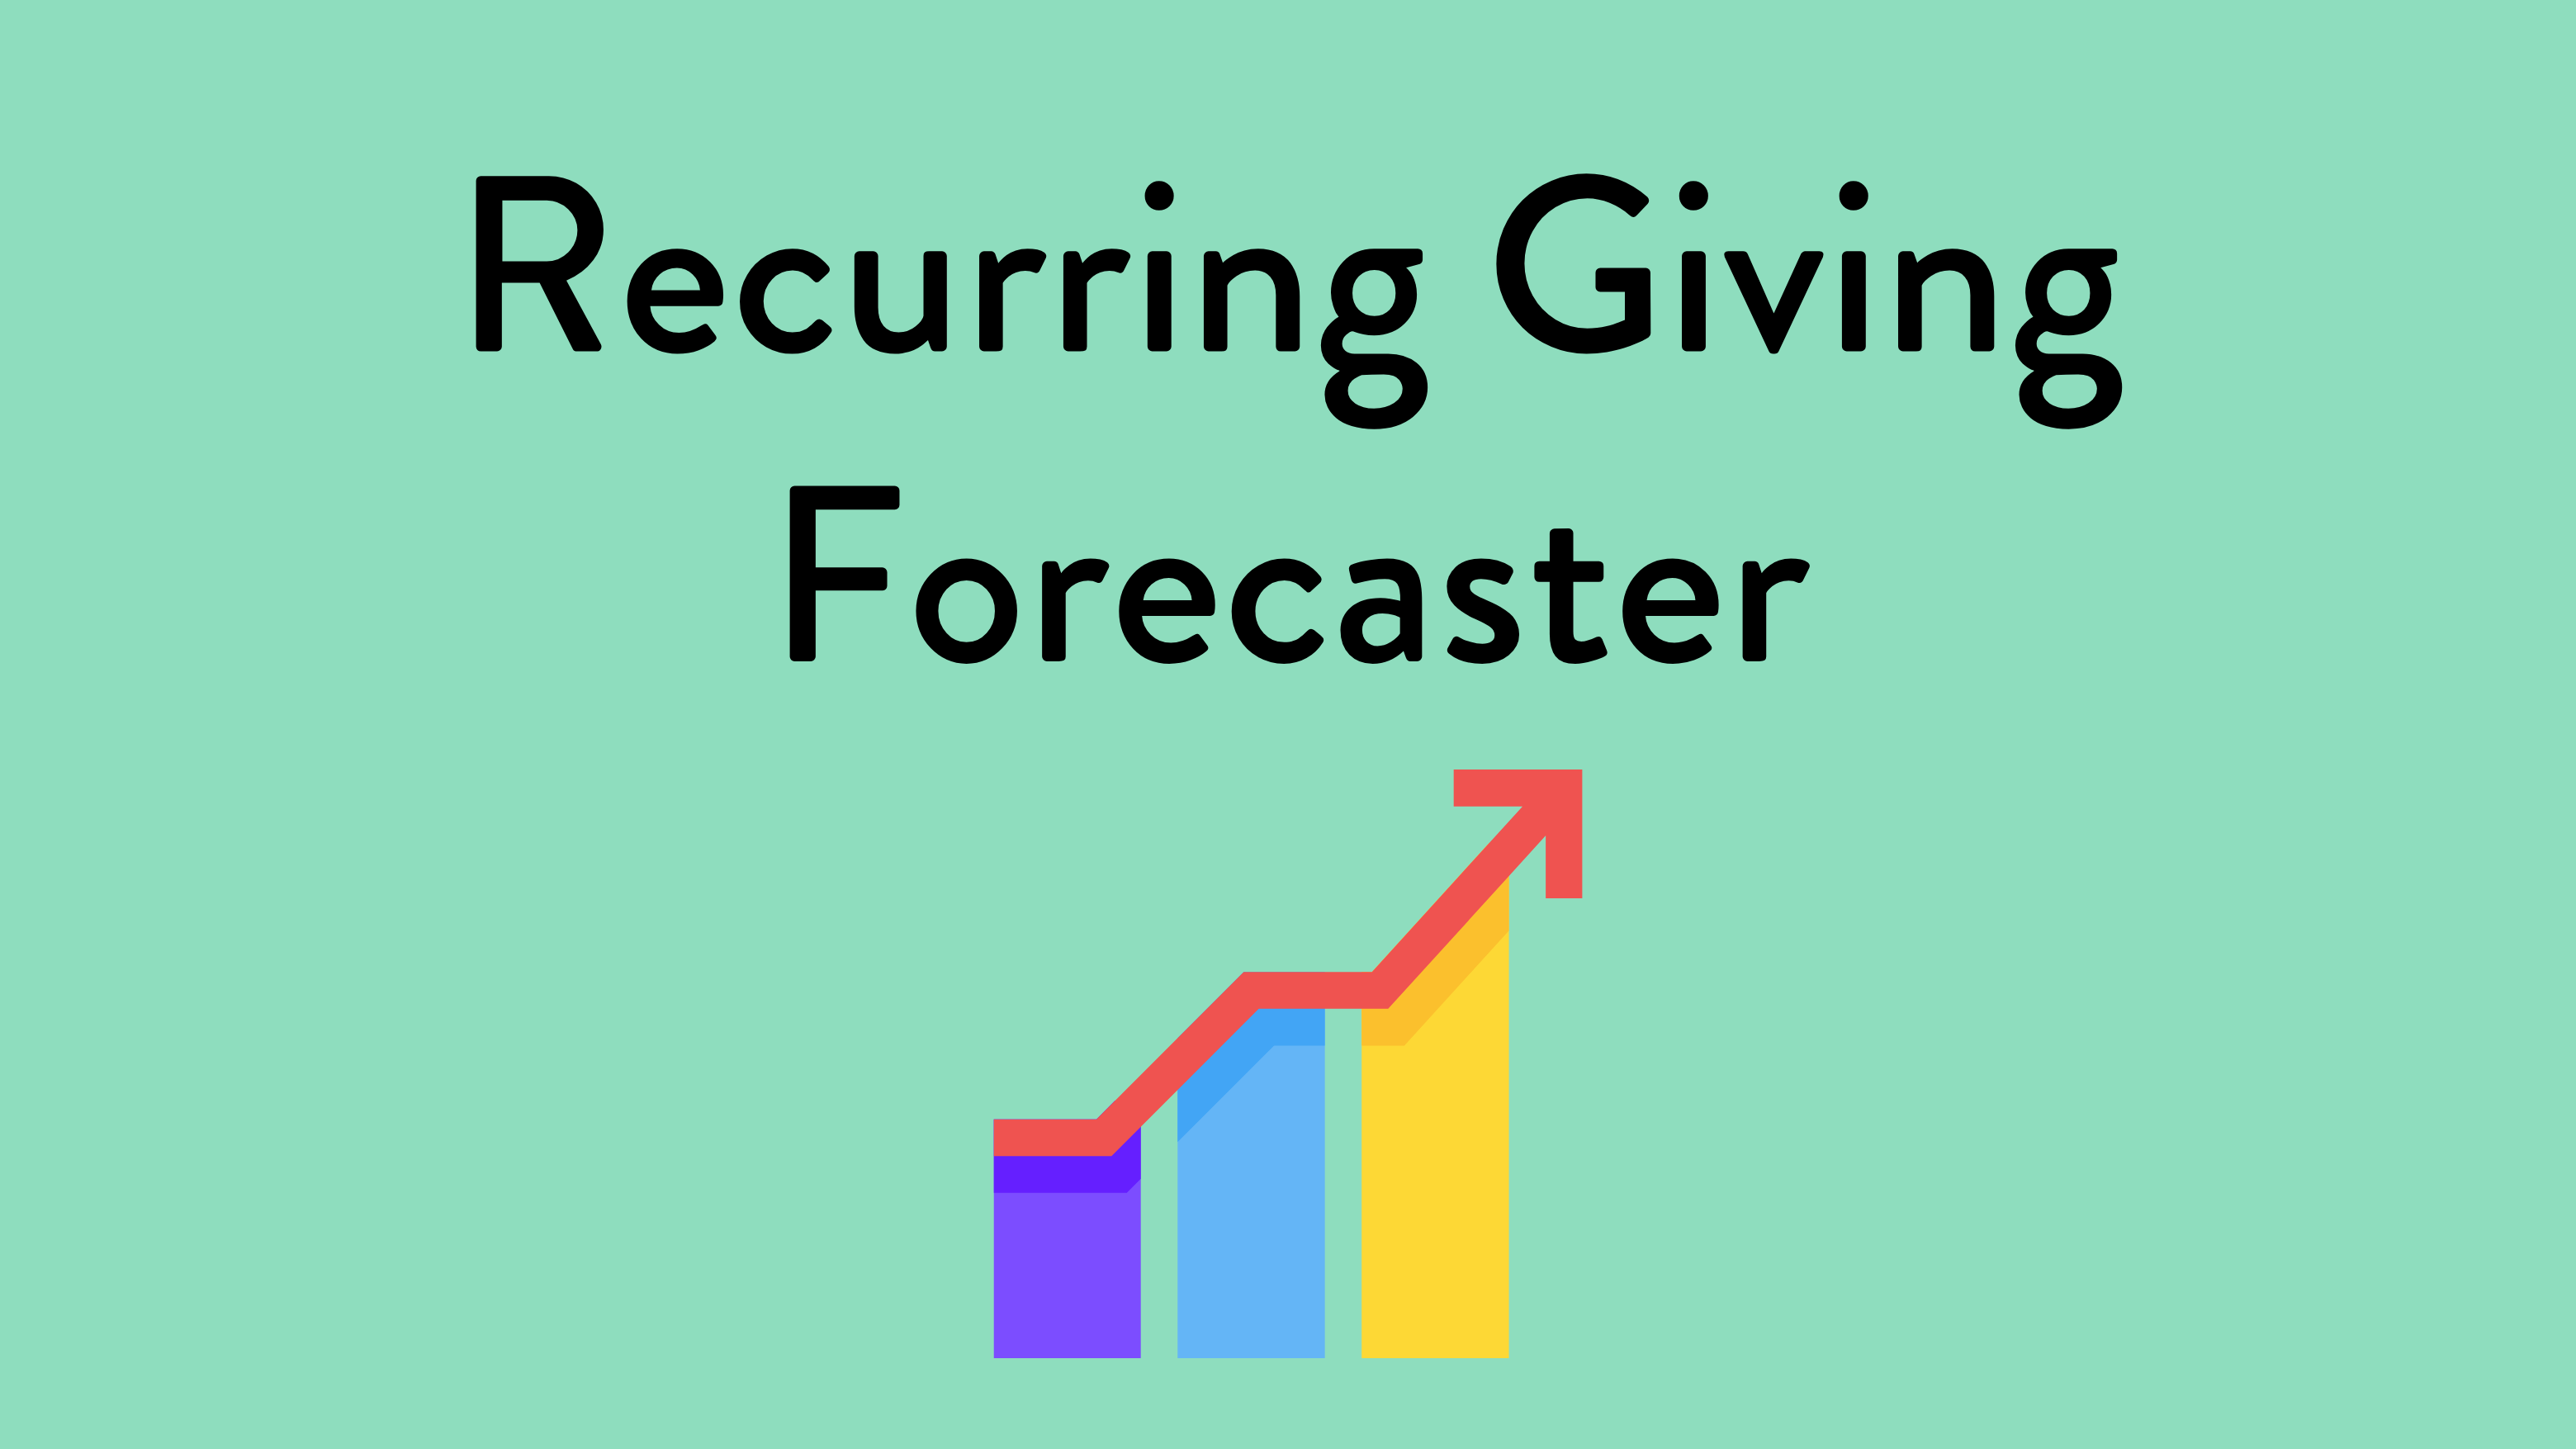 >Recurring Giving Forecaster